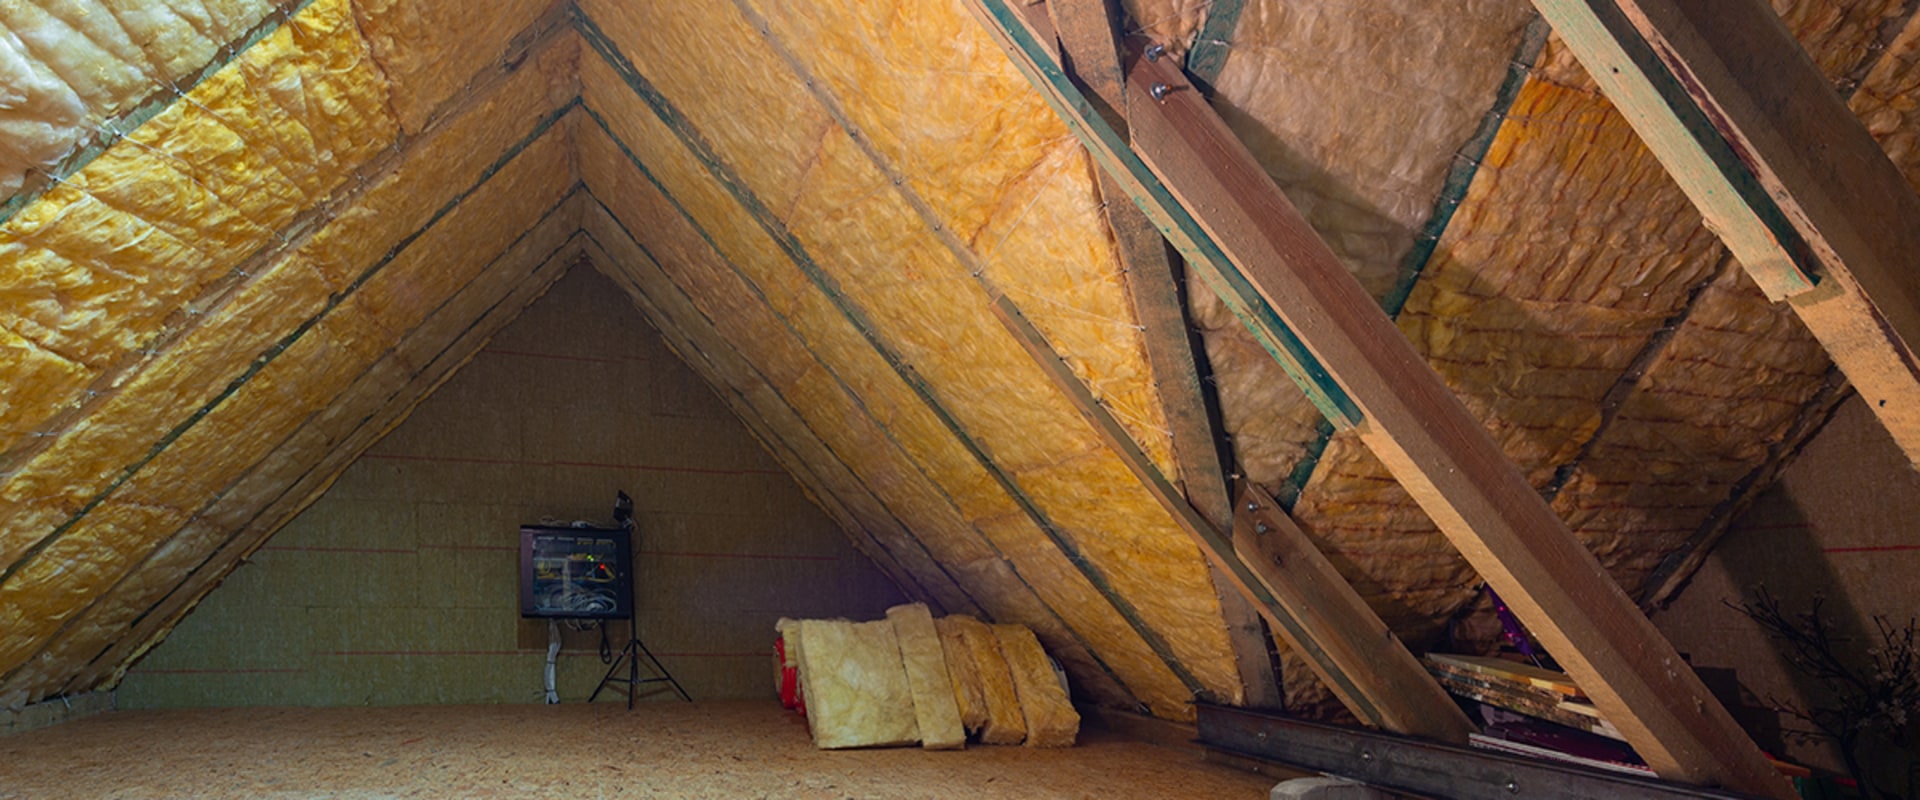 Insulating Your Attic in Cold Climates: Pros and Cons